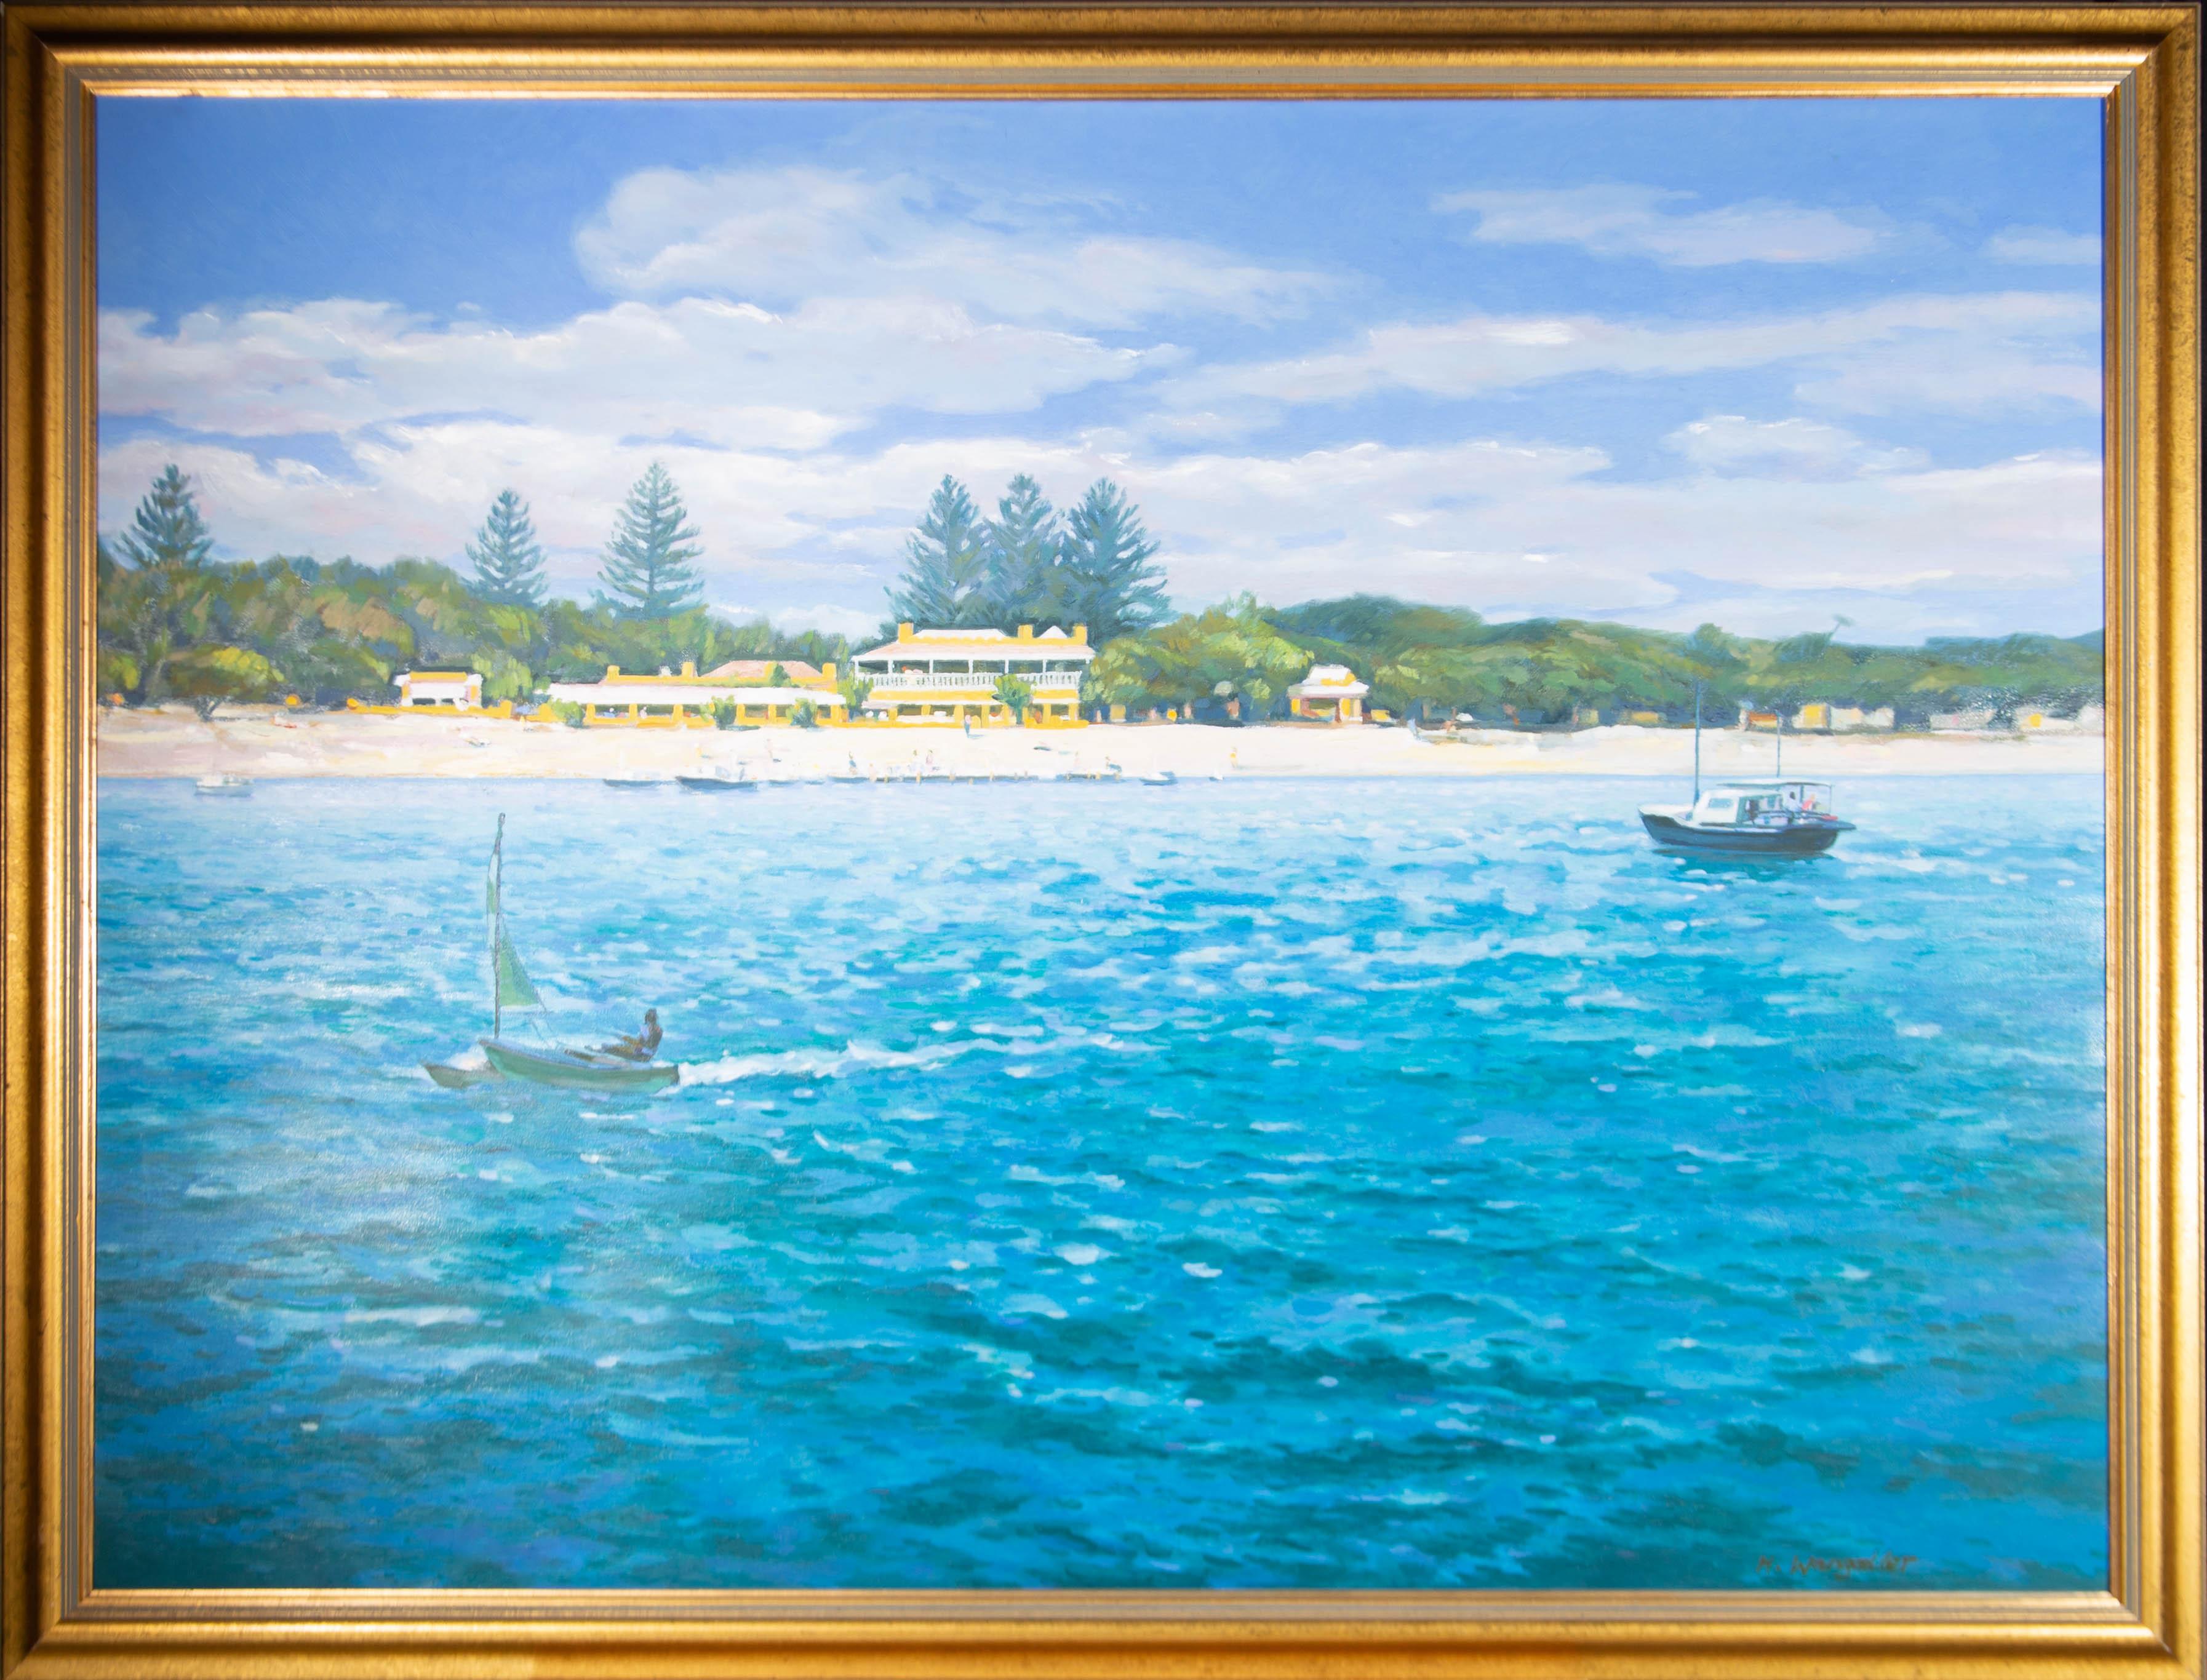 Boats sail across a crystal sea in this radiant painting of a sunny coastline finished with impasto detailing.

The combination of scale, vivid blues, and passive brushwork create a completely immersive and refreshing artwork.

Well presented in a